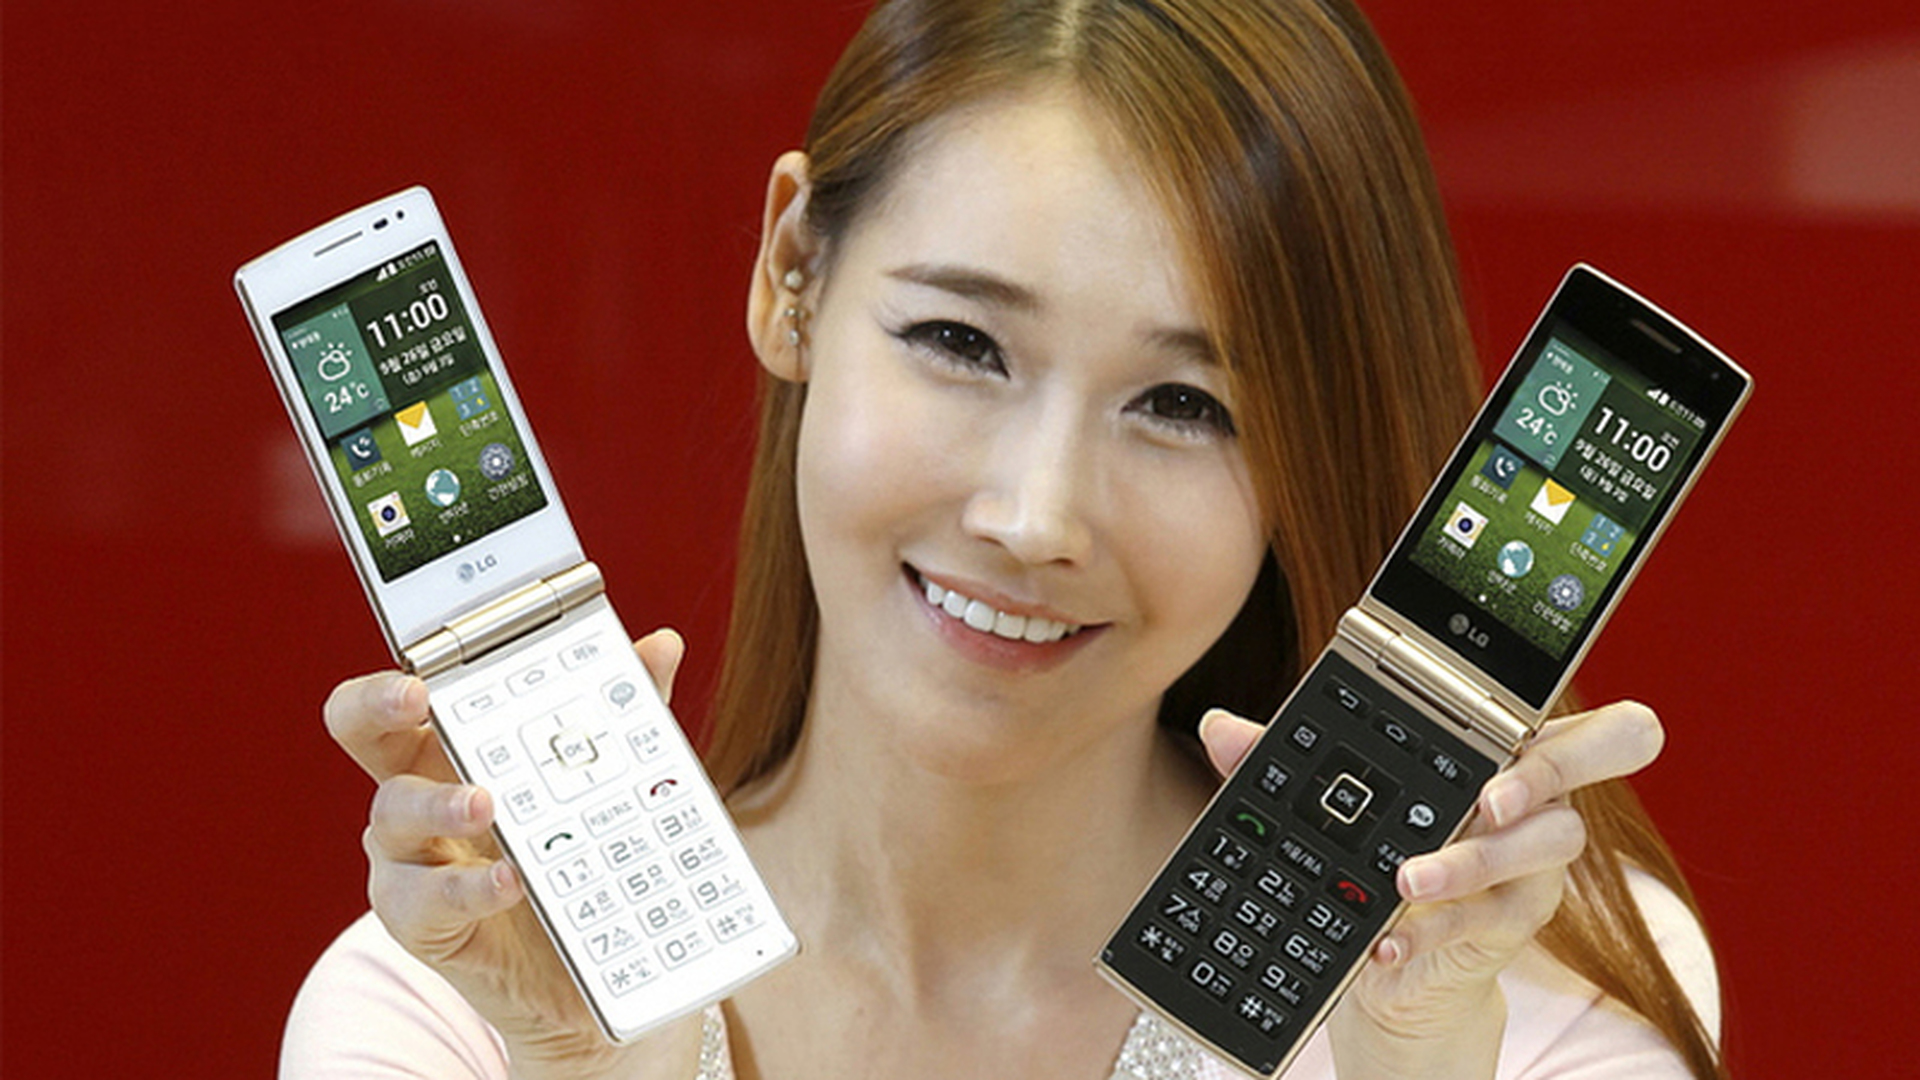 LG Android Flip Phone